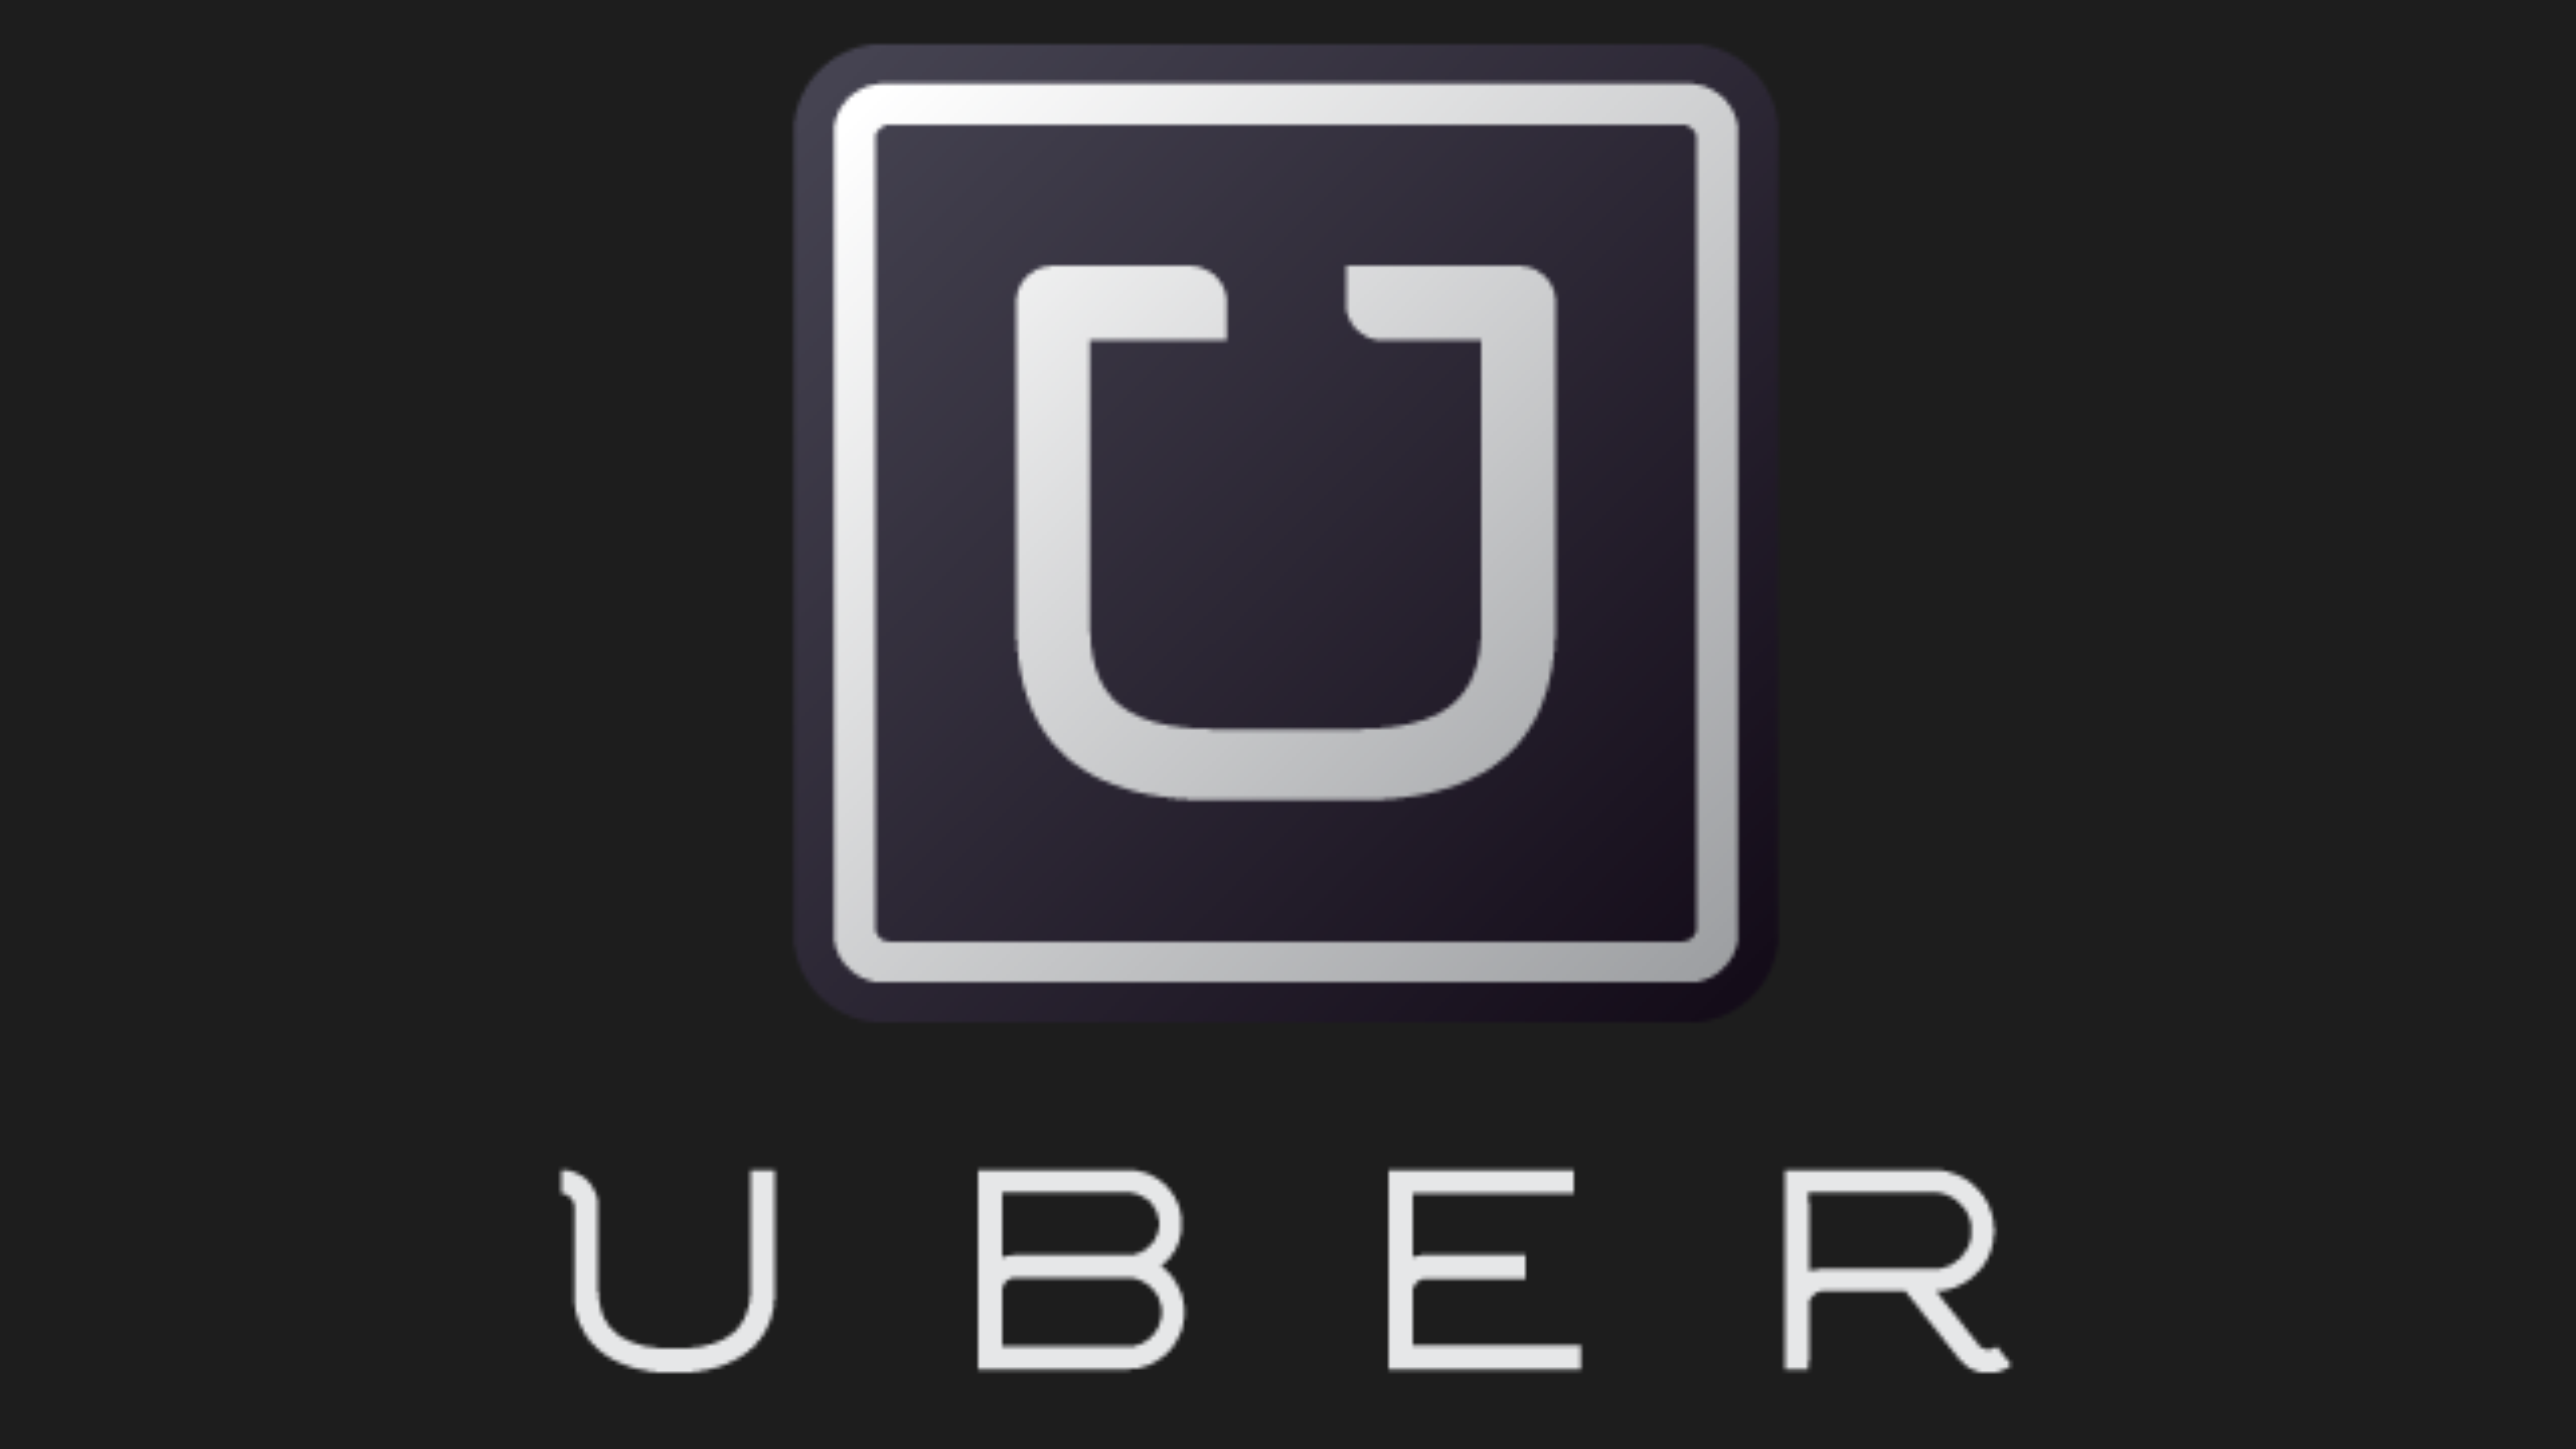 Broad consensus supports the future of ridesharing services in Nebraska